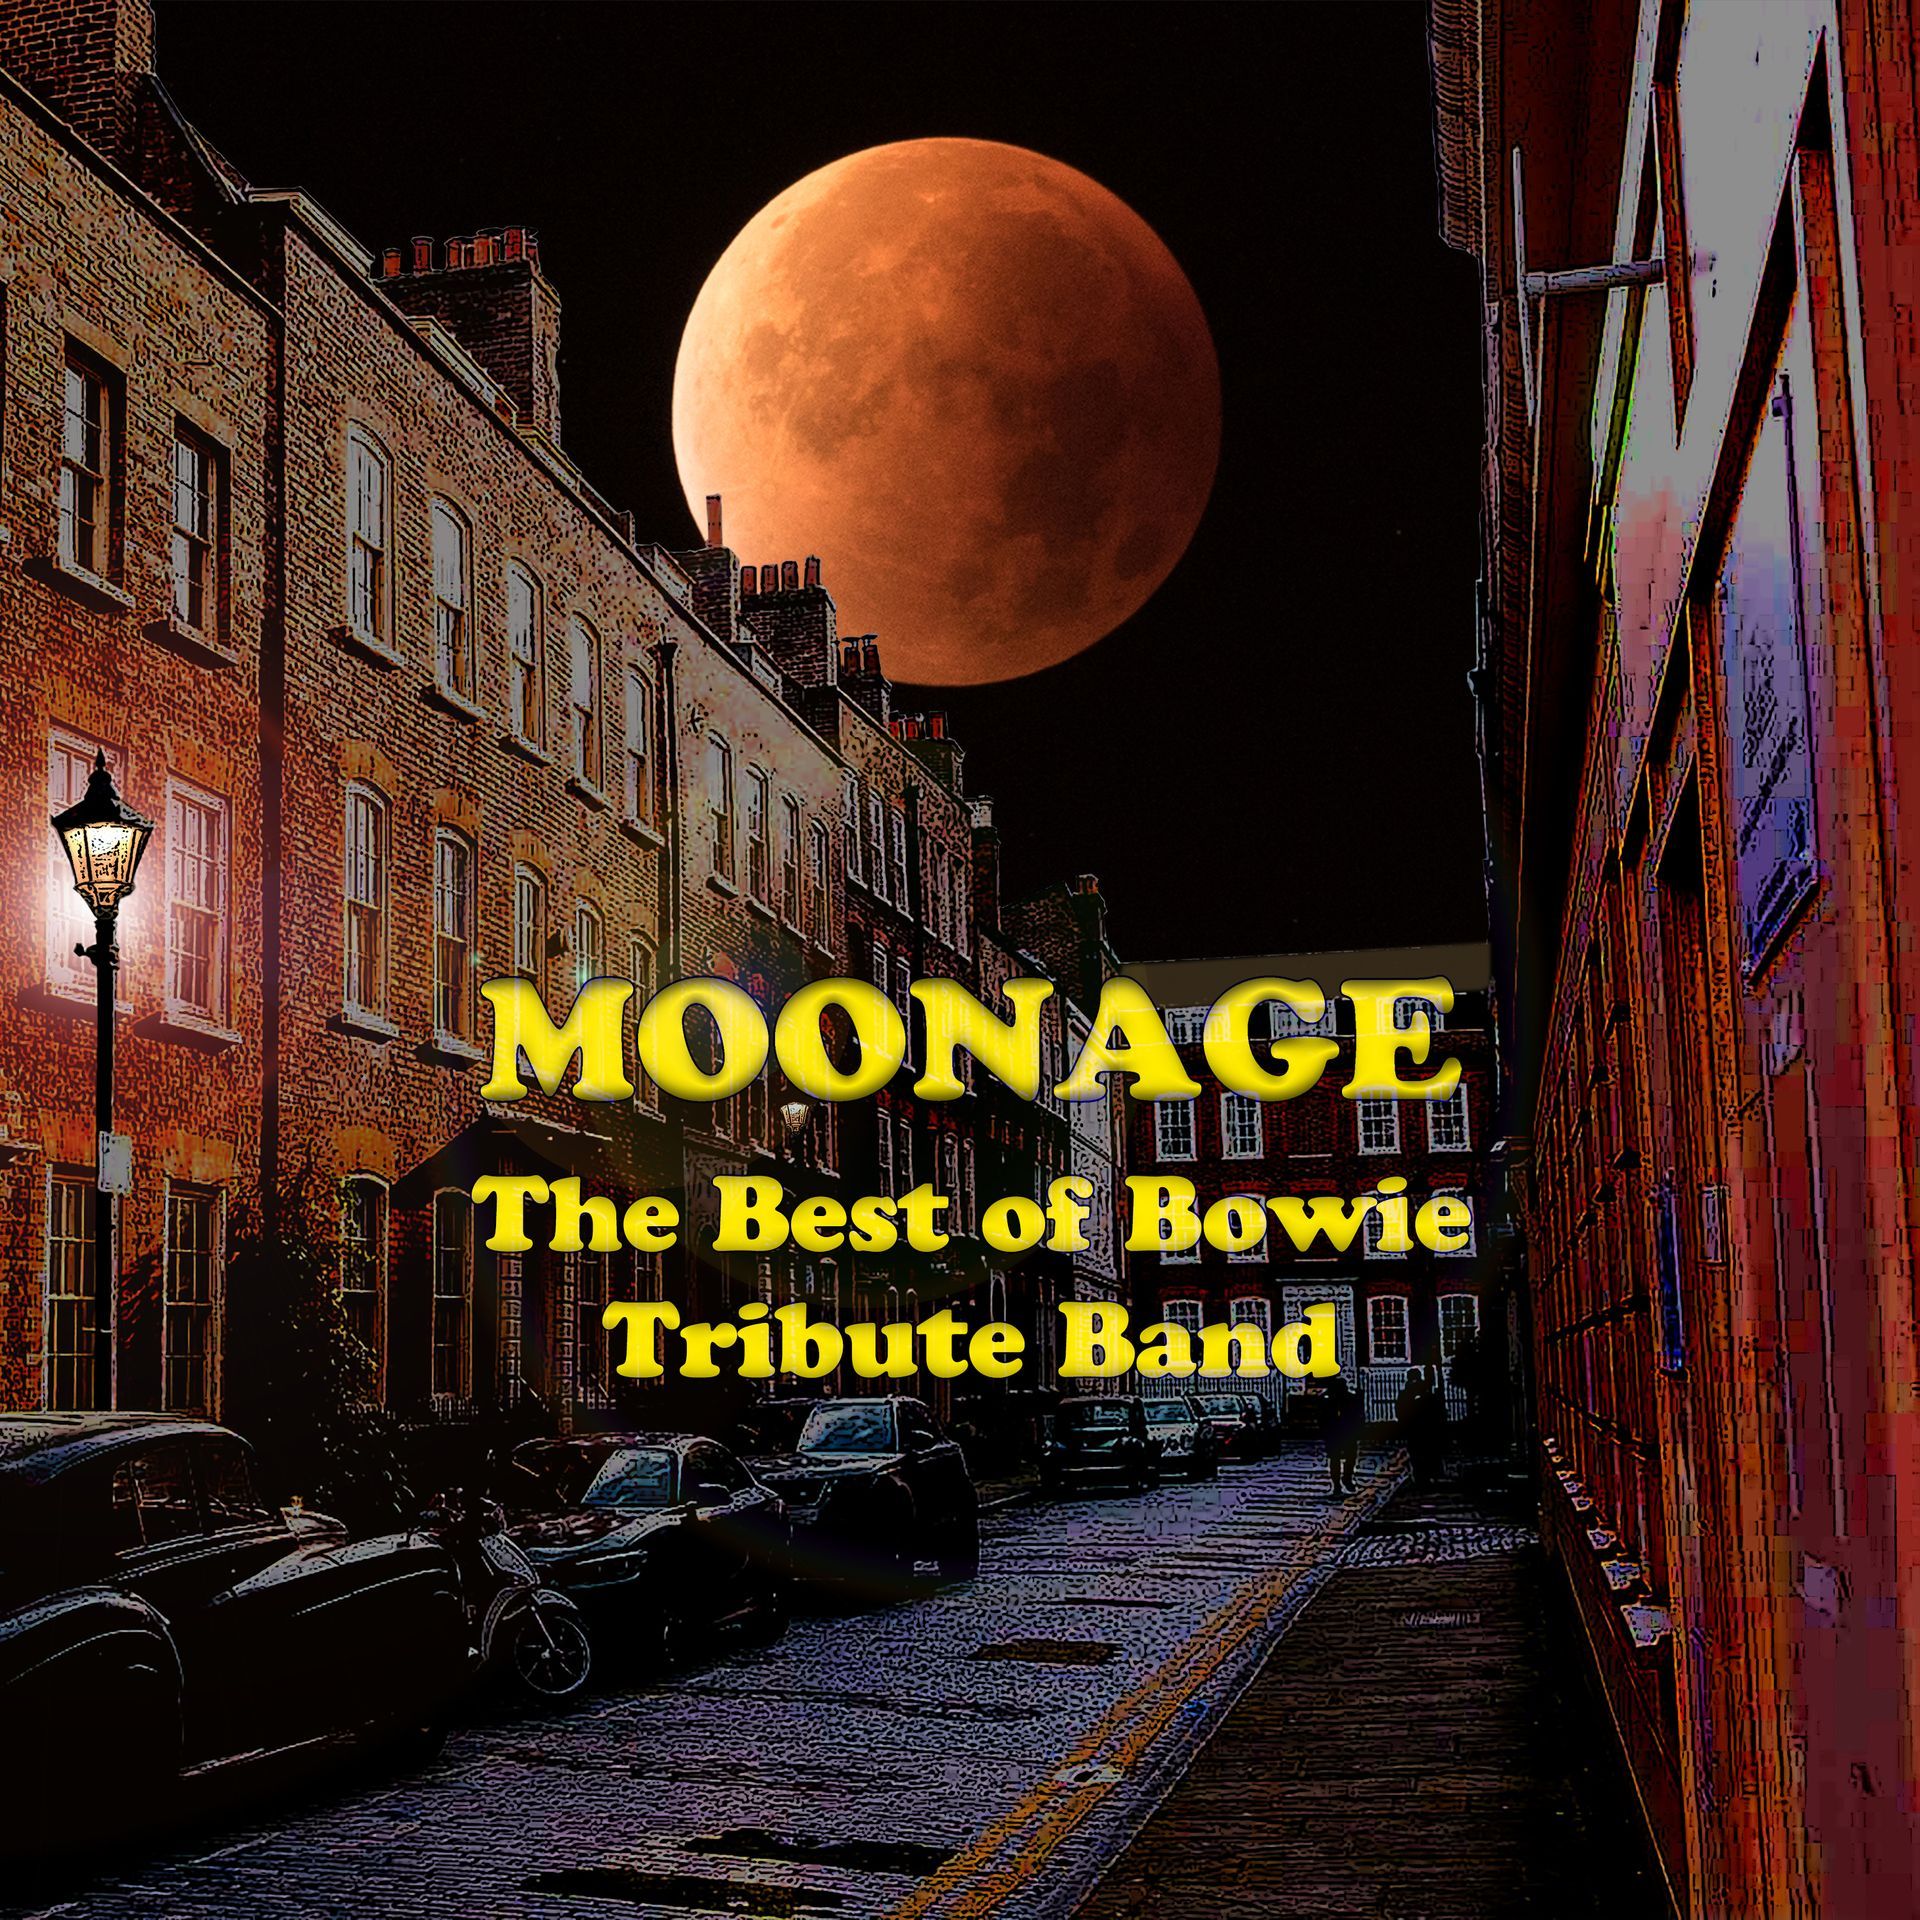 Moonage, The Best Of Bowie Tribute Band